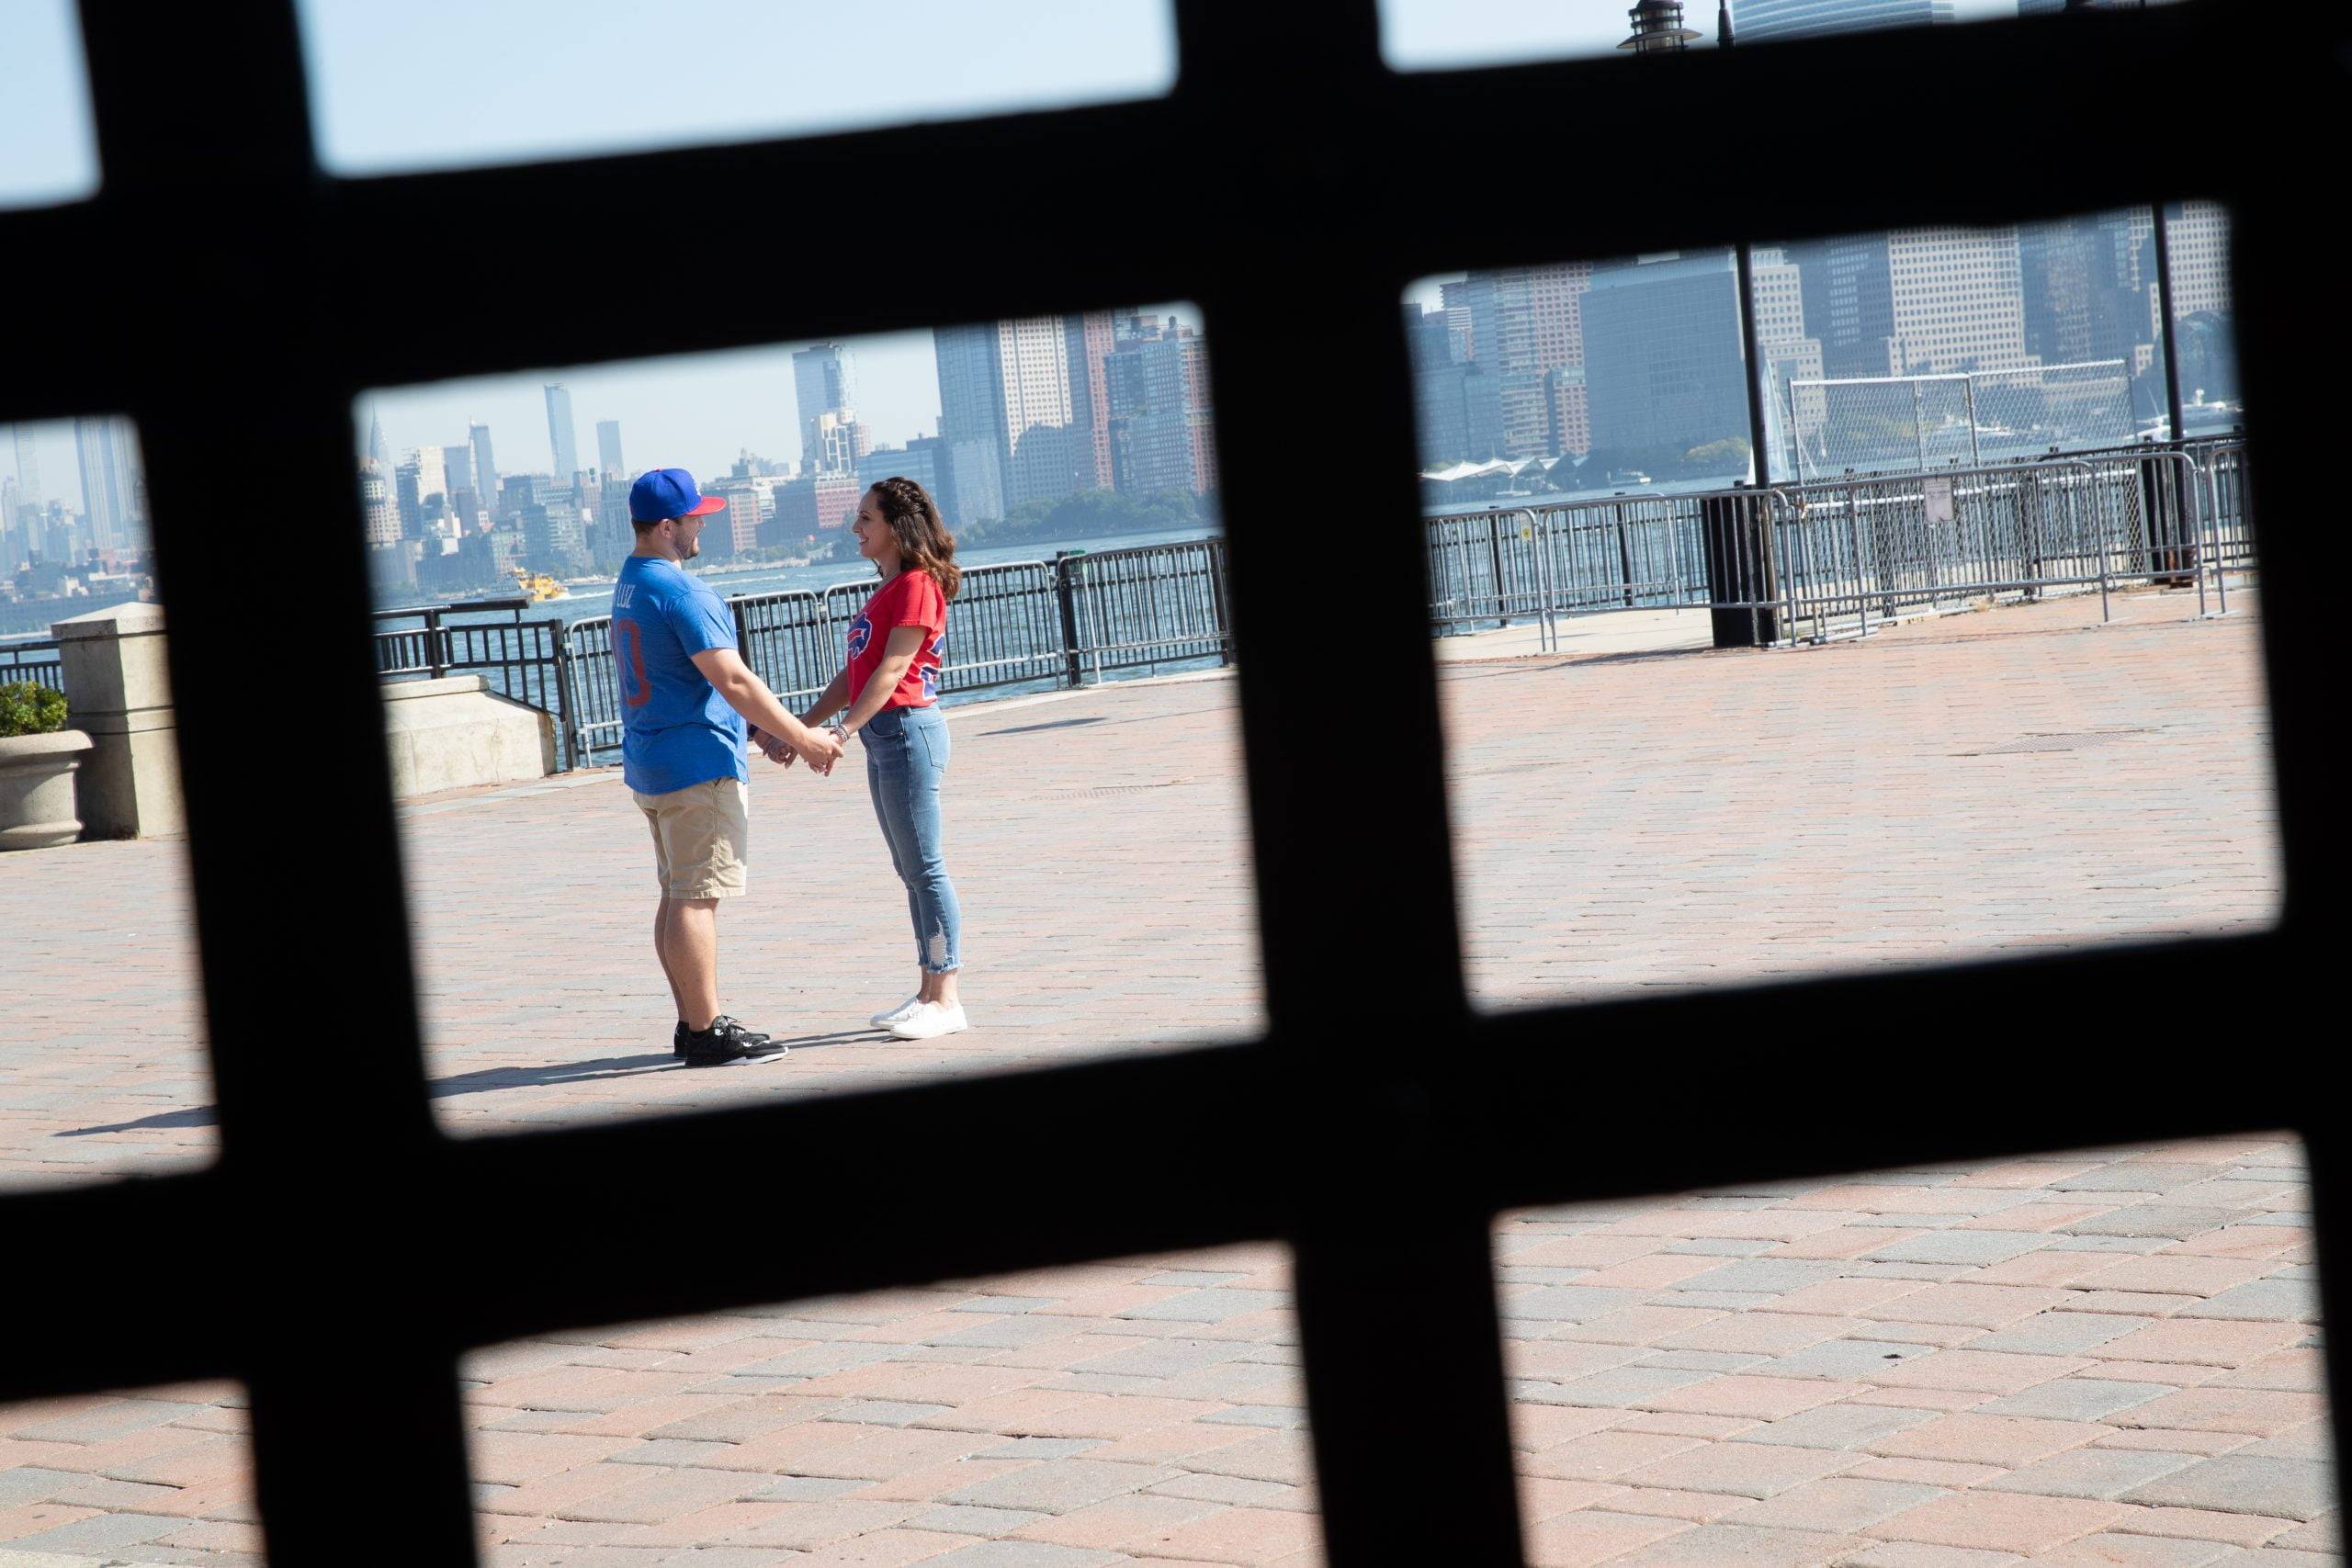 A couple holding hands through a fence in front of a city skyline.